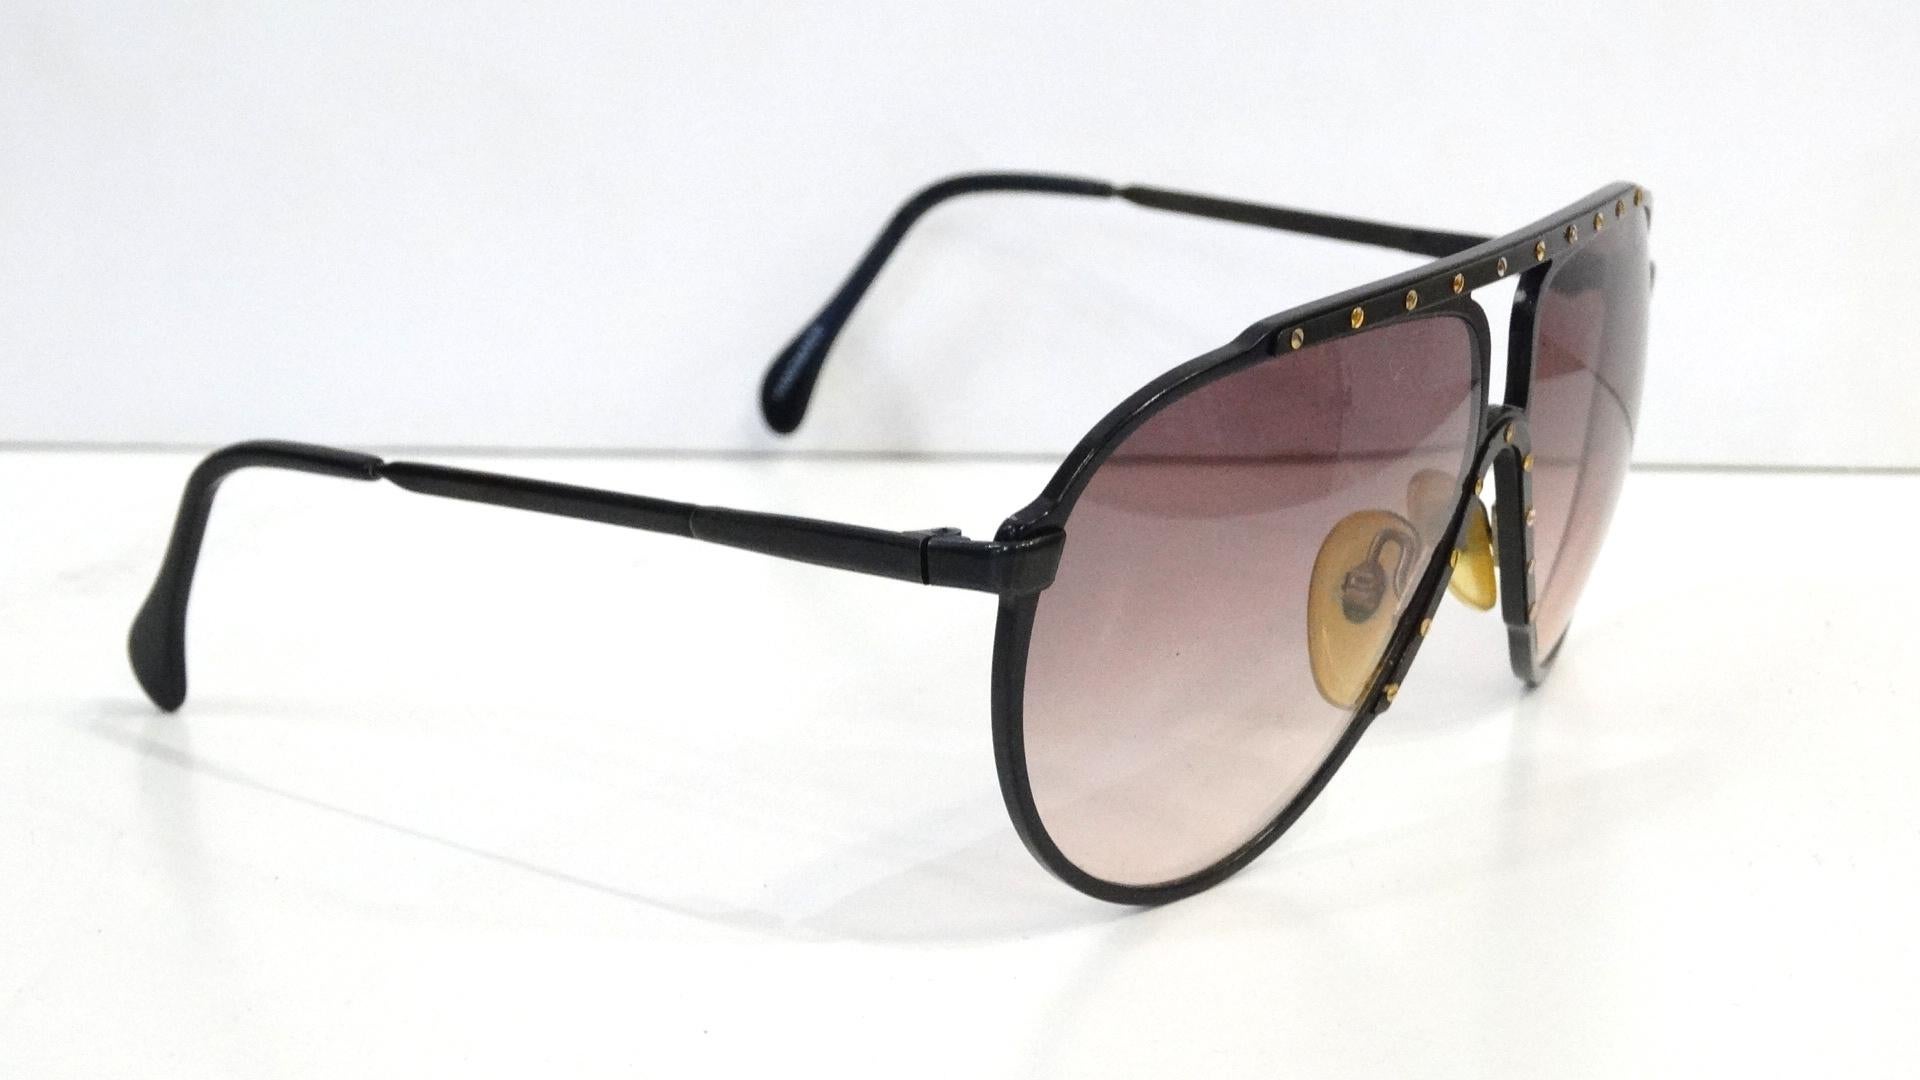 The Most Amazing Sunglasses! Circa late 1980s, these Alpina M1 sunglasses are an aviator style and feature a black metal frame with gold plated flat head screws on the top bar and down the bridge. Dark brown/black gradient lenses. The most killer